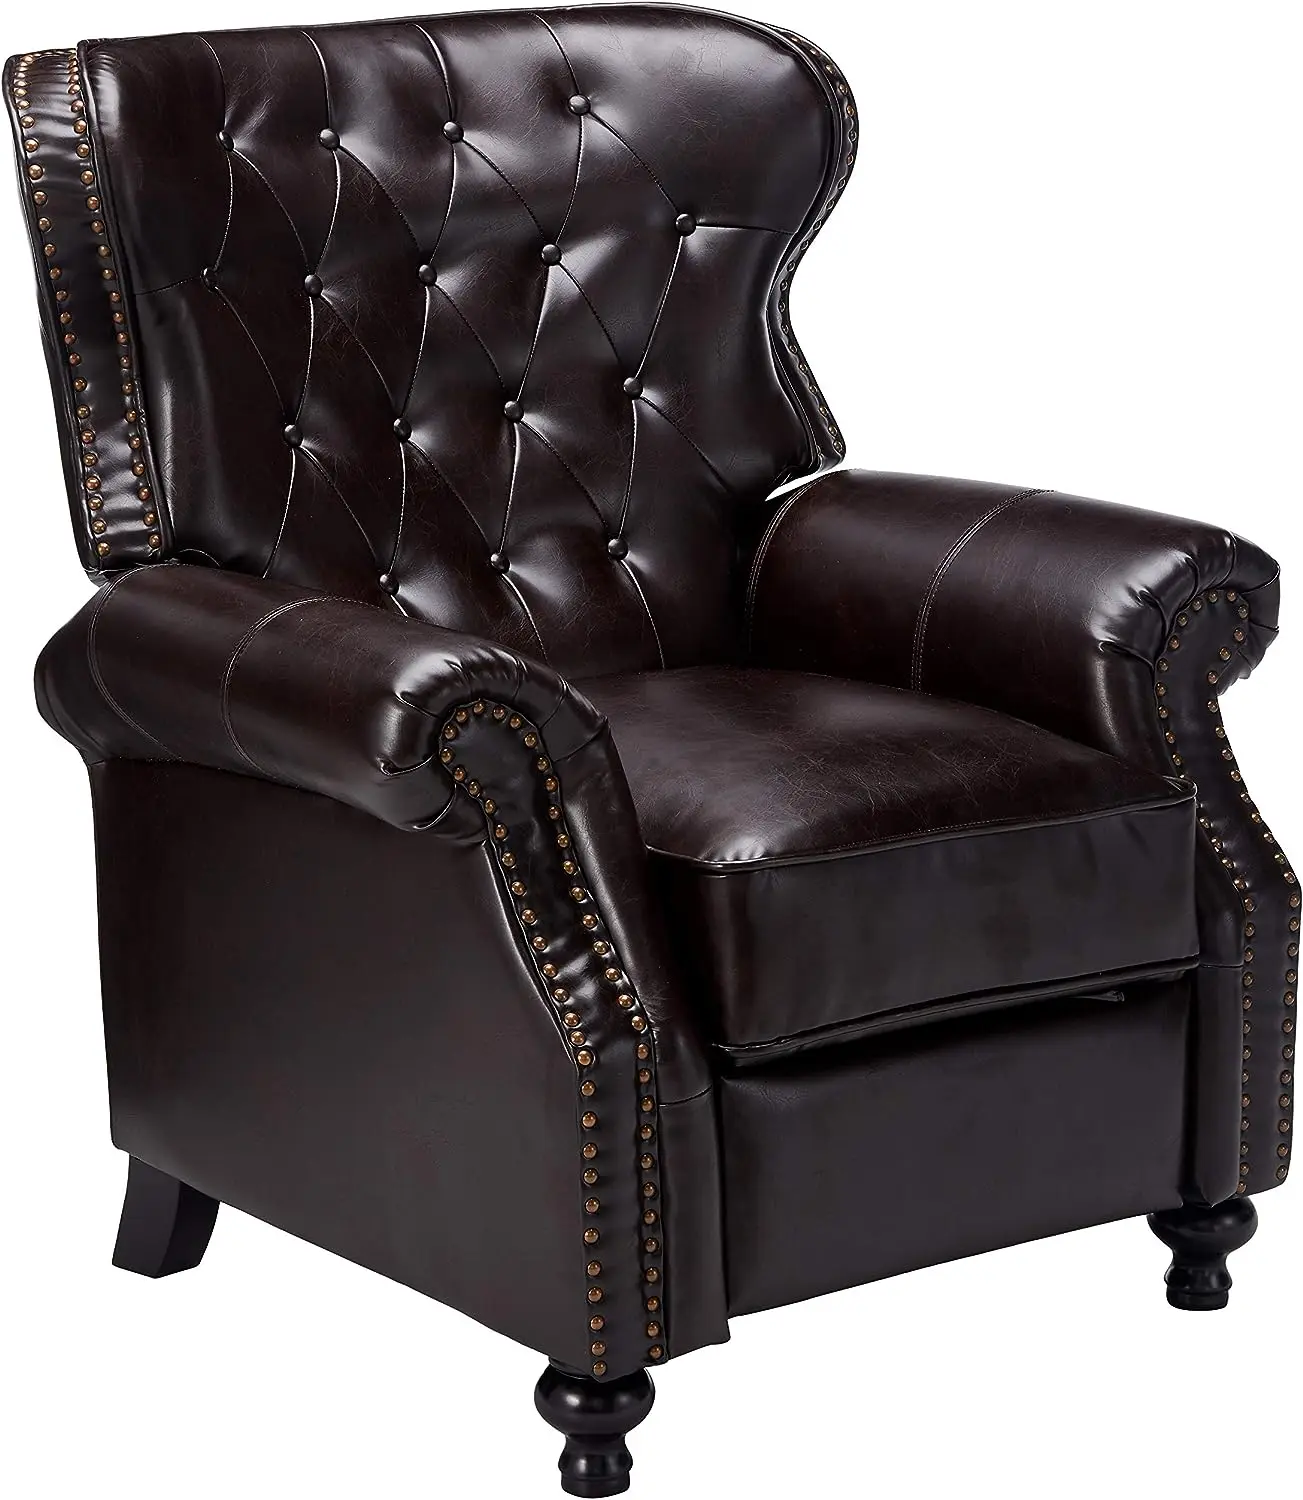 

Reconstituted Bycast Leather Recliner, Brown